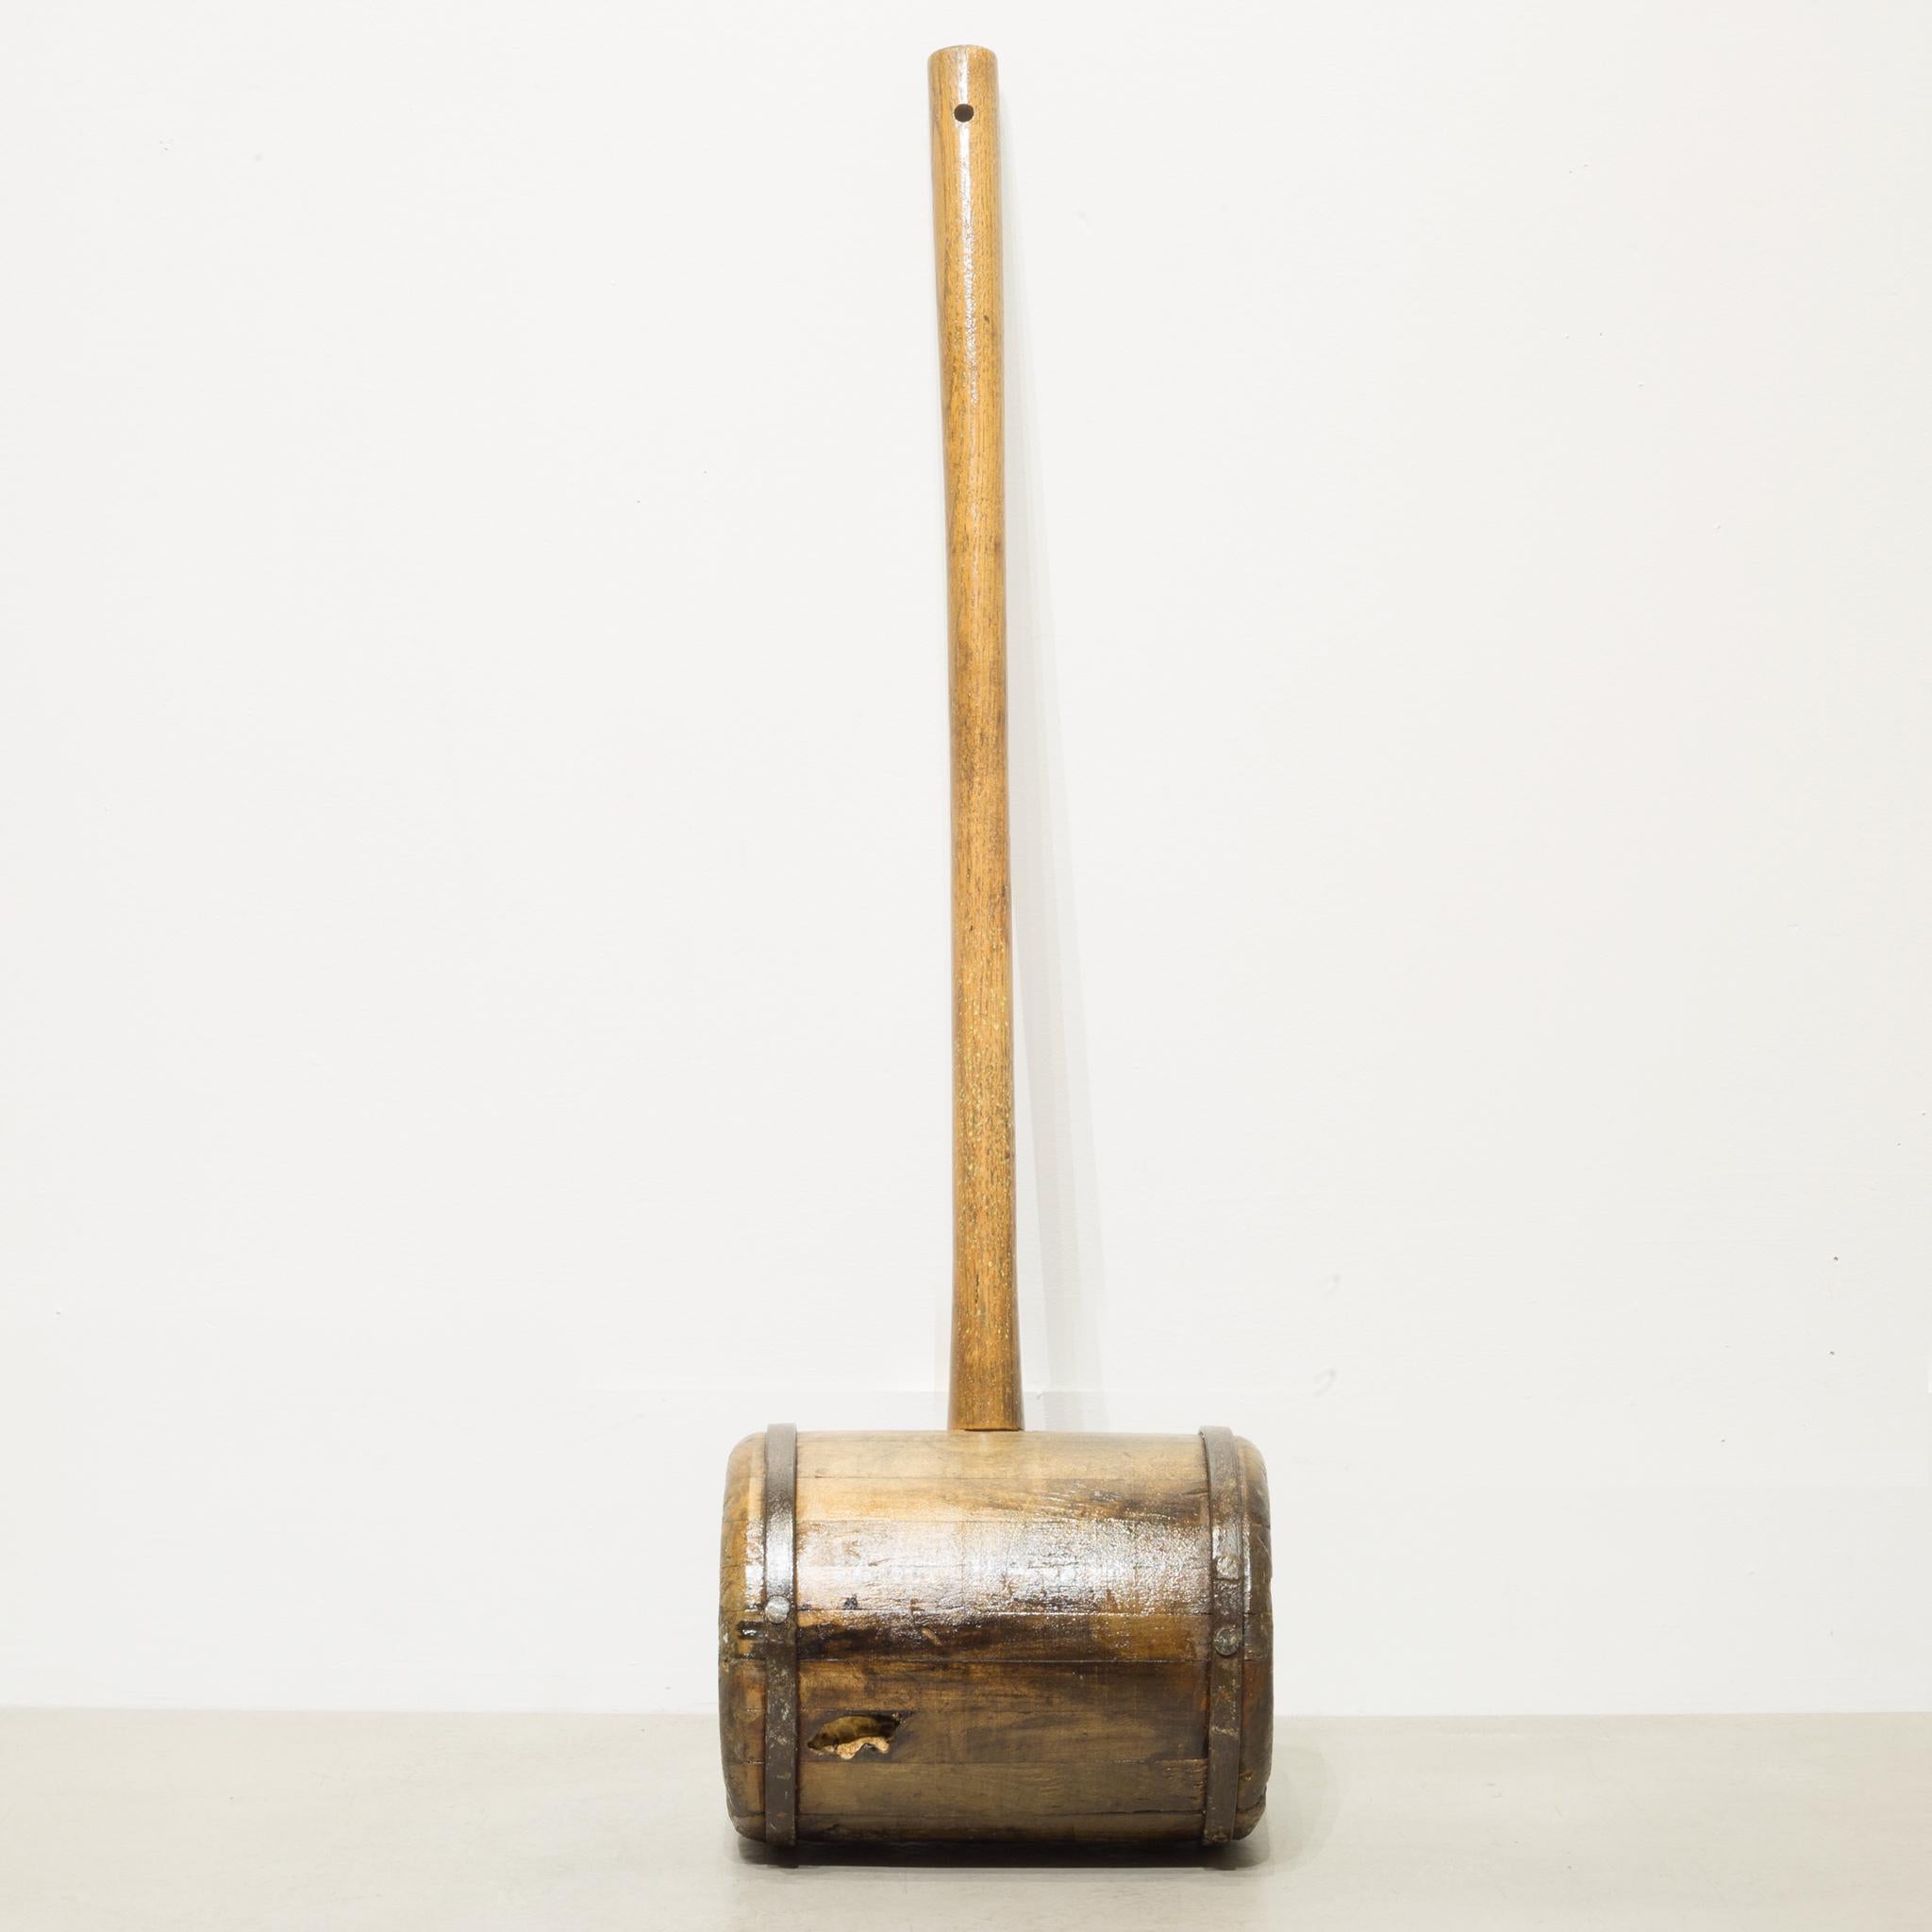 About

This is a late 19th century iron banded wooden carnival or circus strongman mallet.

Creator: Unknown.
Date of manufacture: circa1880.
Materials and techniques: Iron, wood.
Condition good. Wear consistent with age and use.
Dimensions: